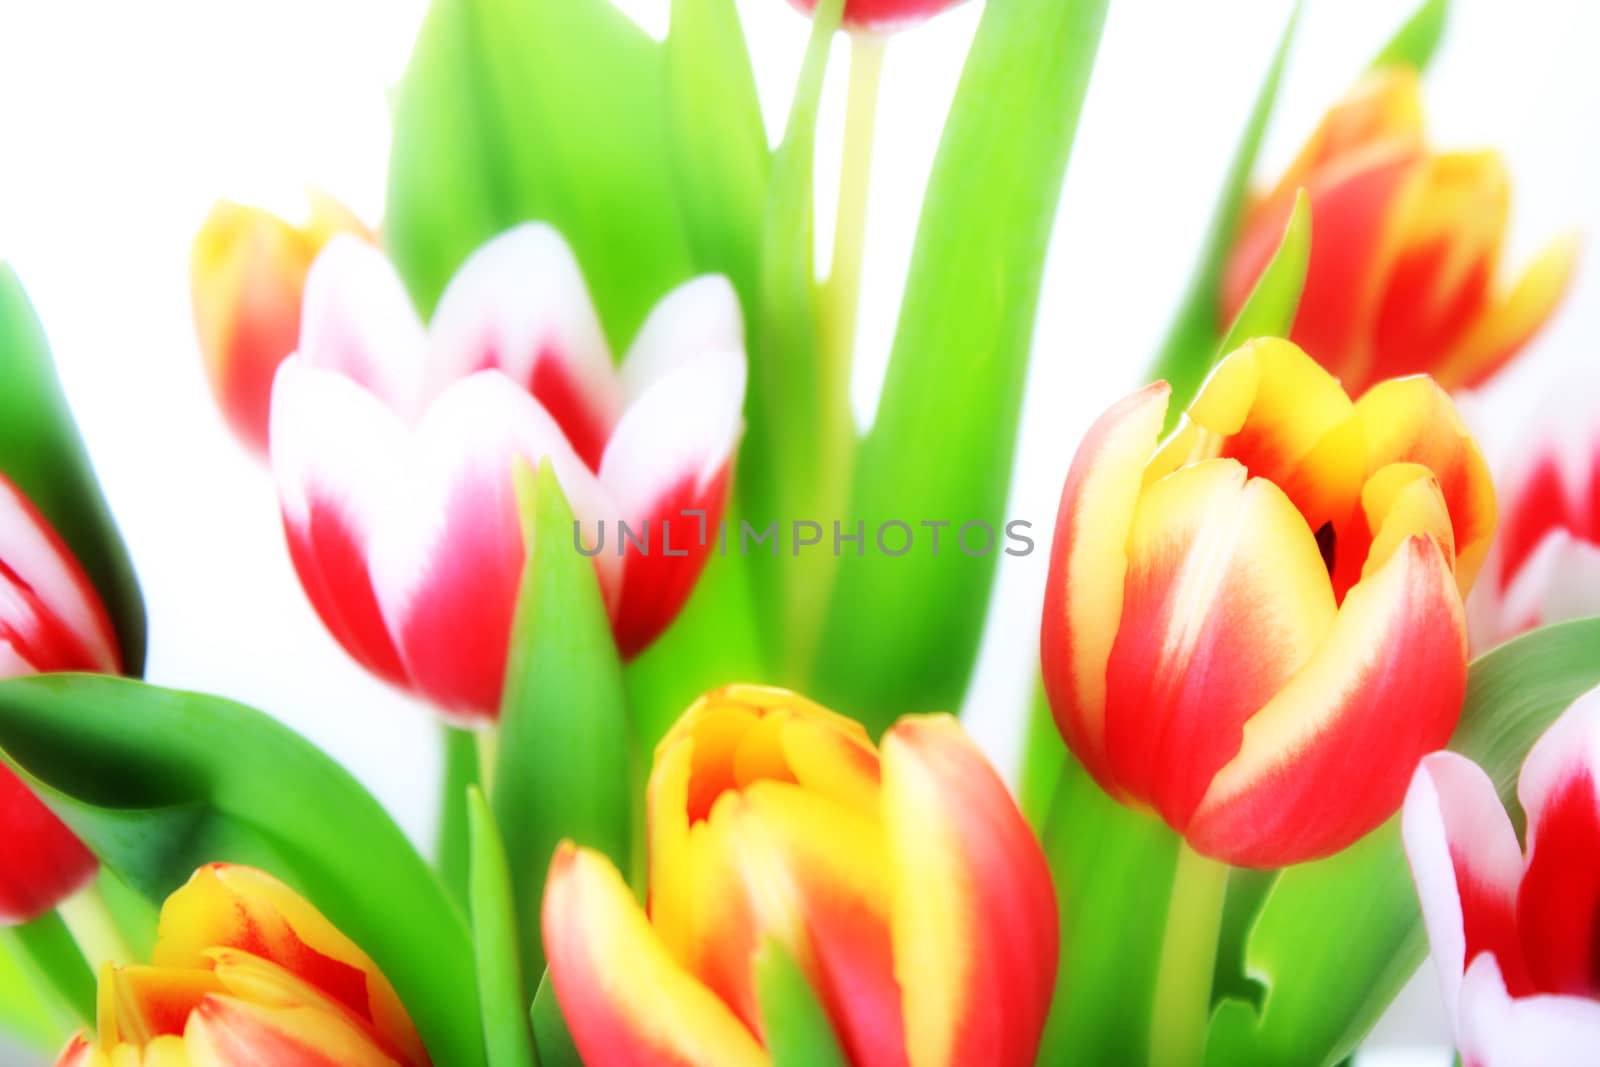 Flowers, Tulip by Tomjac1980